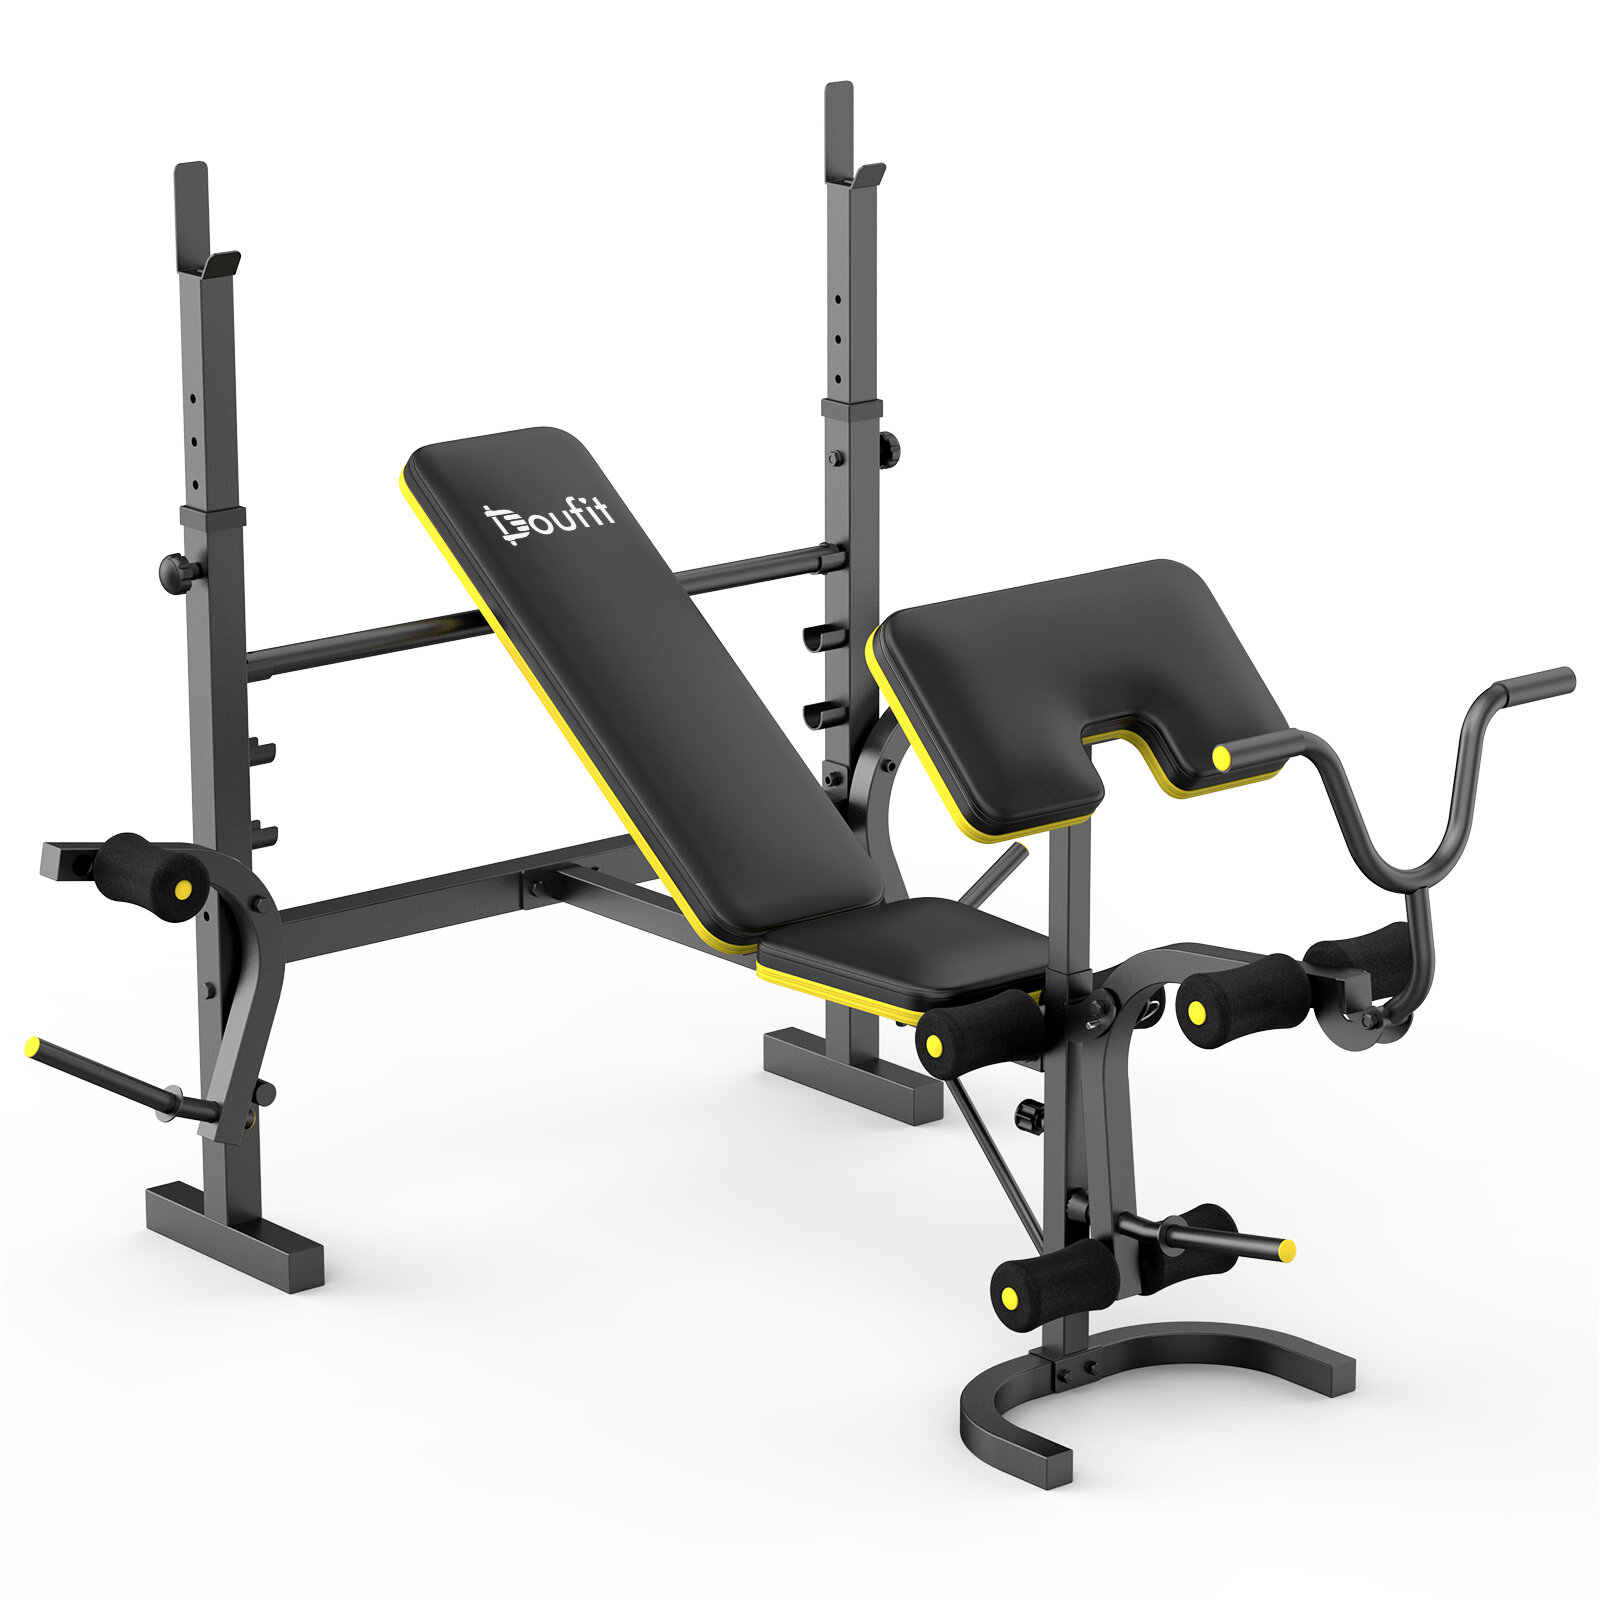 Doufit WB-07 Weight Bench 270kg Load Capacity 4-in-1 Multifunctional Sit Up Benches 15 Position Adjustment Multi-role Fo